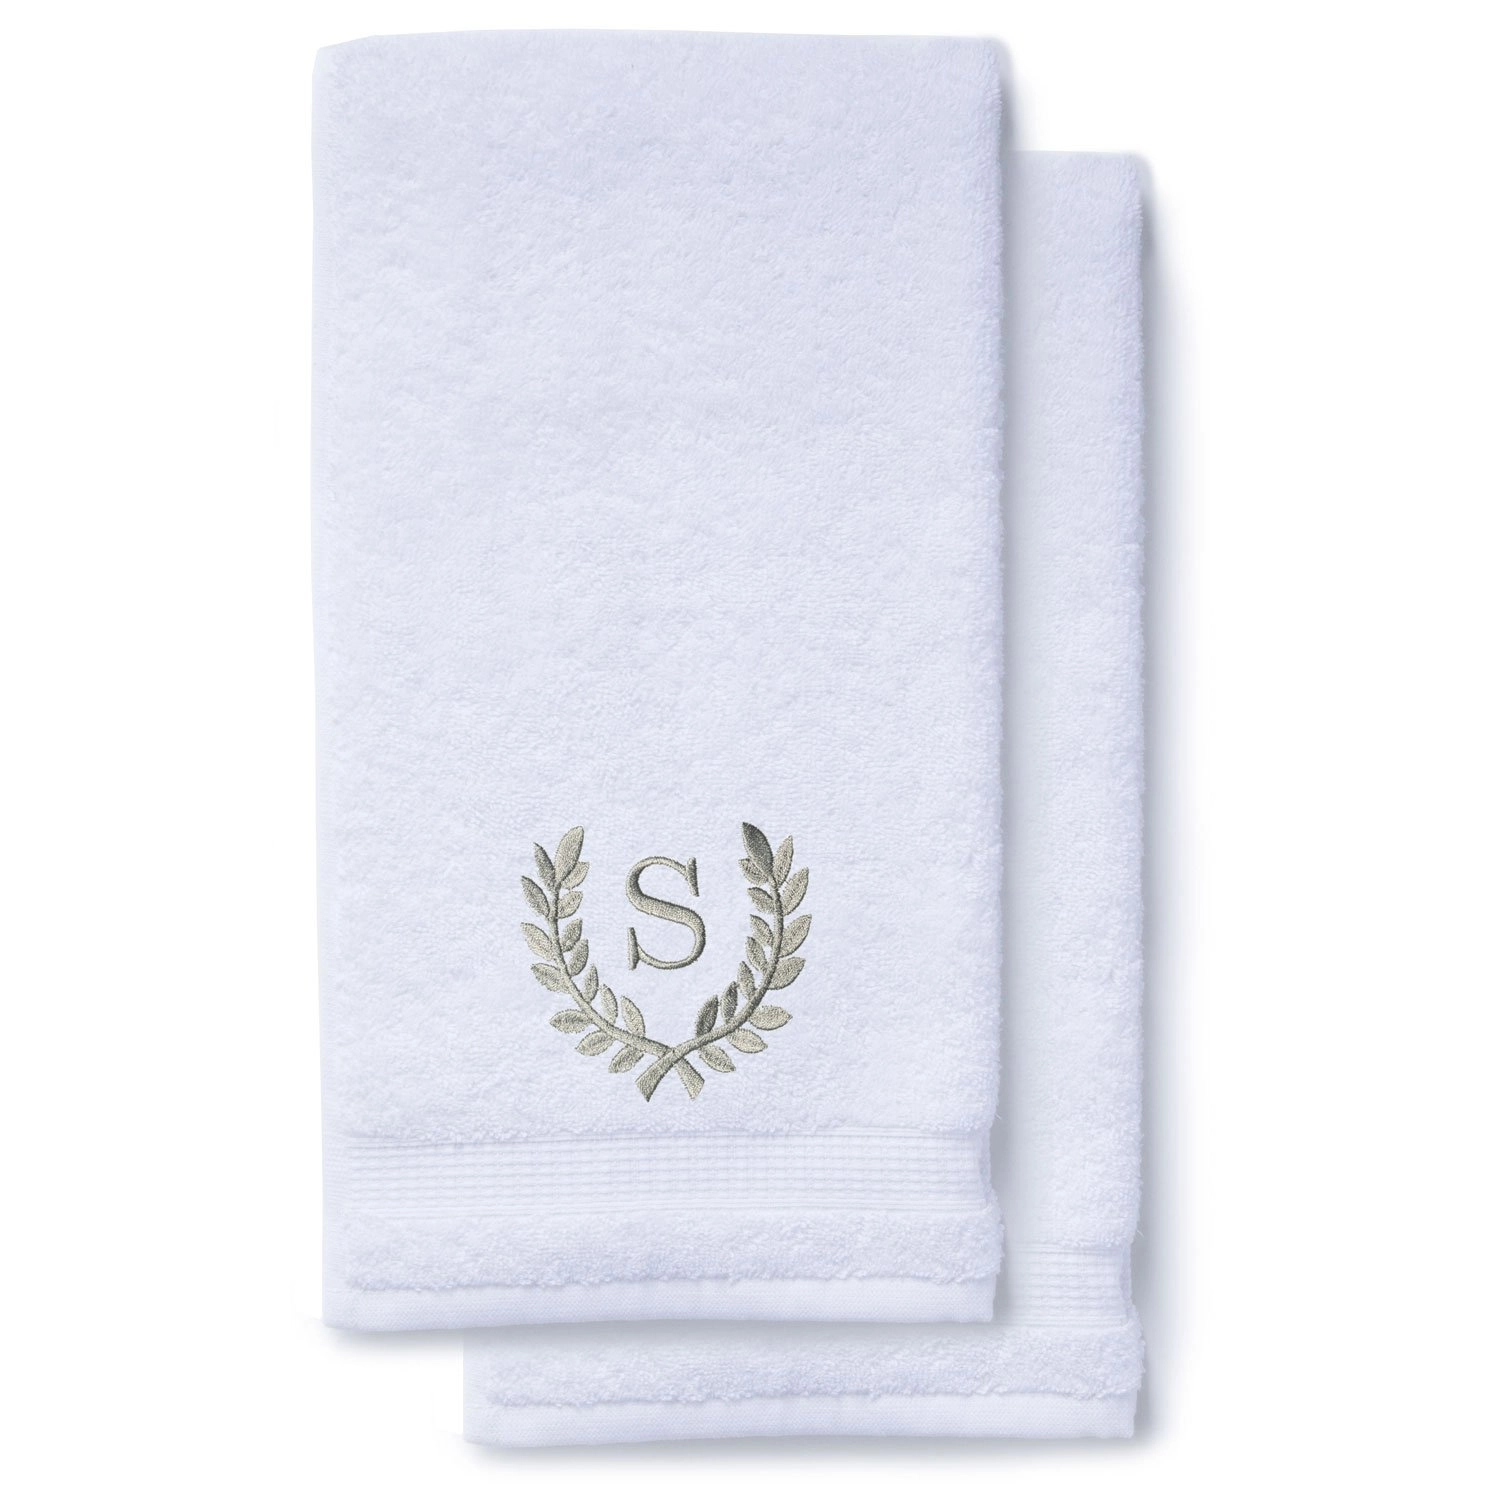 https://robemart.com/images/thumbnails/detailed/7/S-Gray-stacked-Monogrammed-Hand-Towels.webp